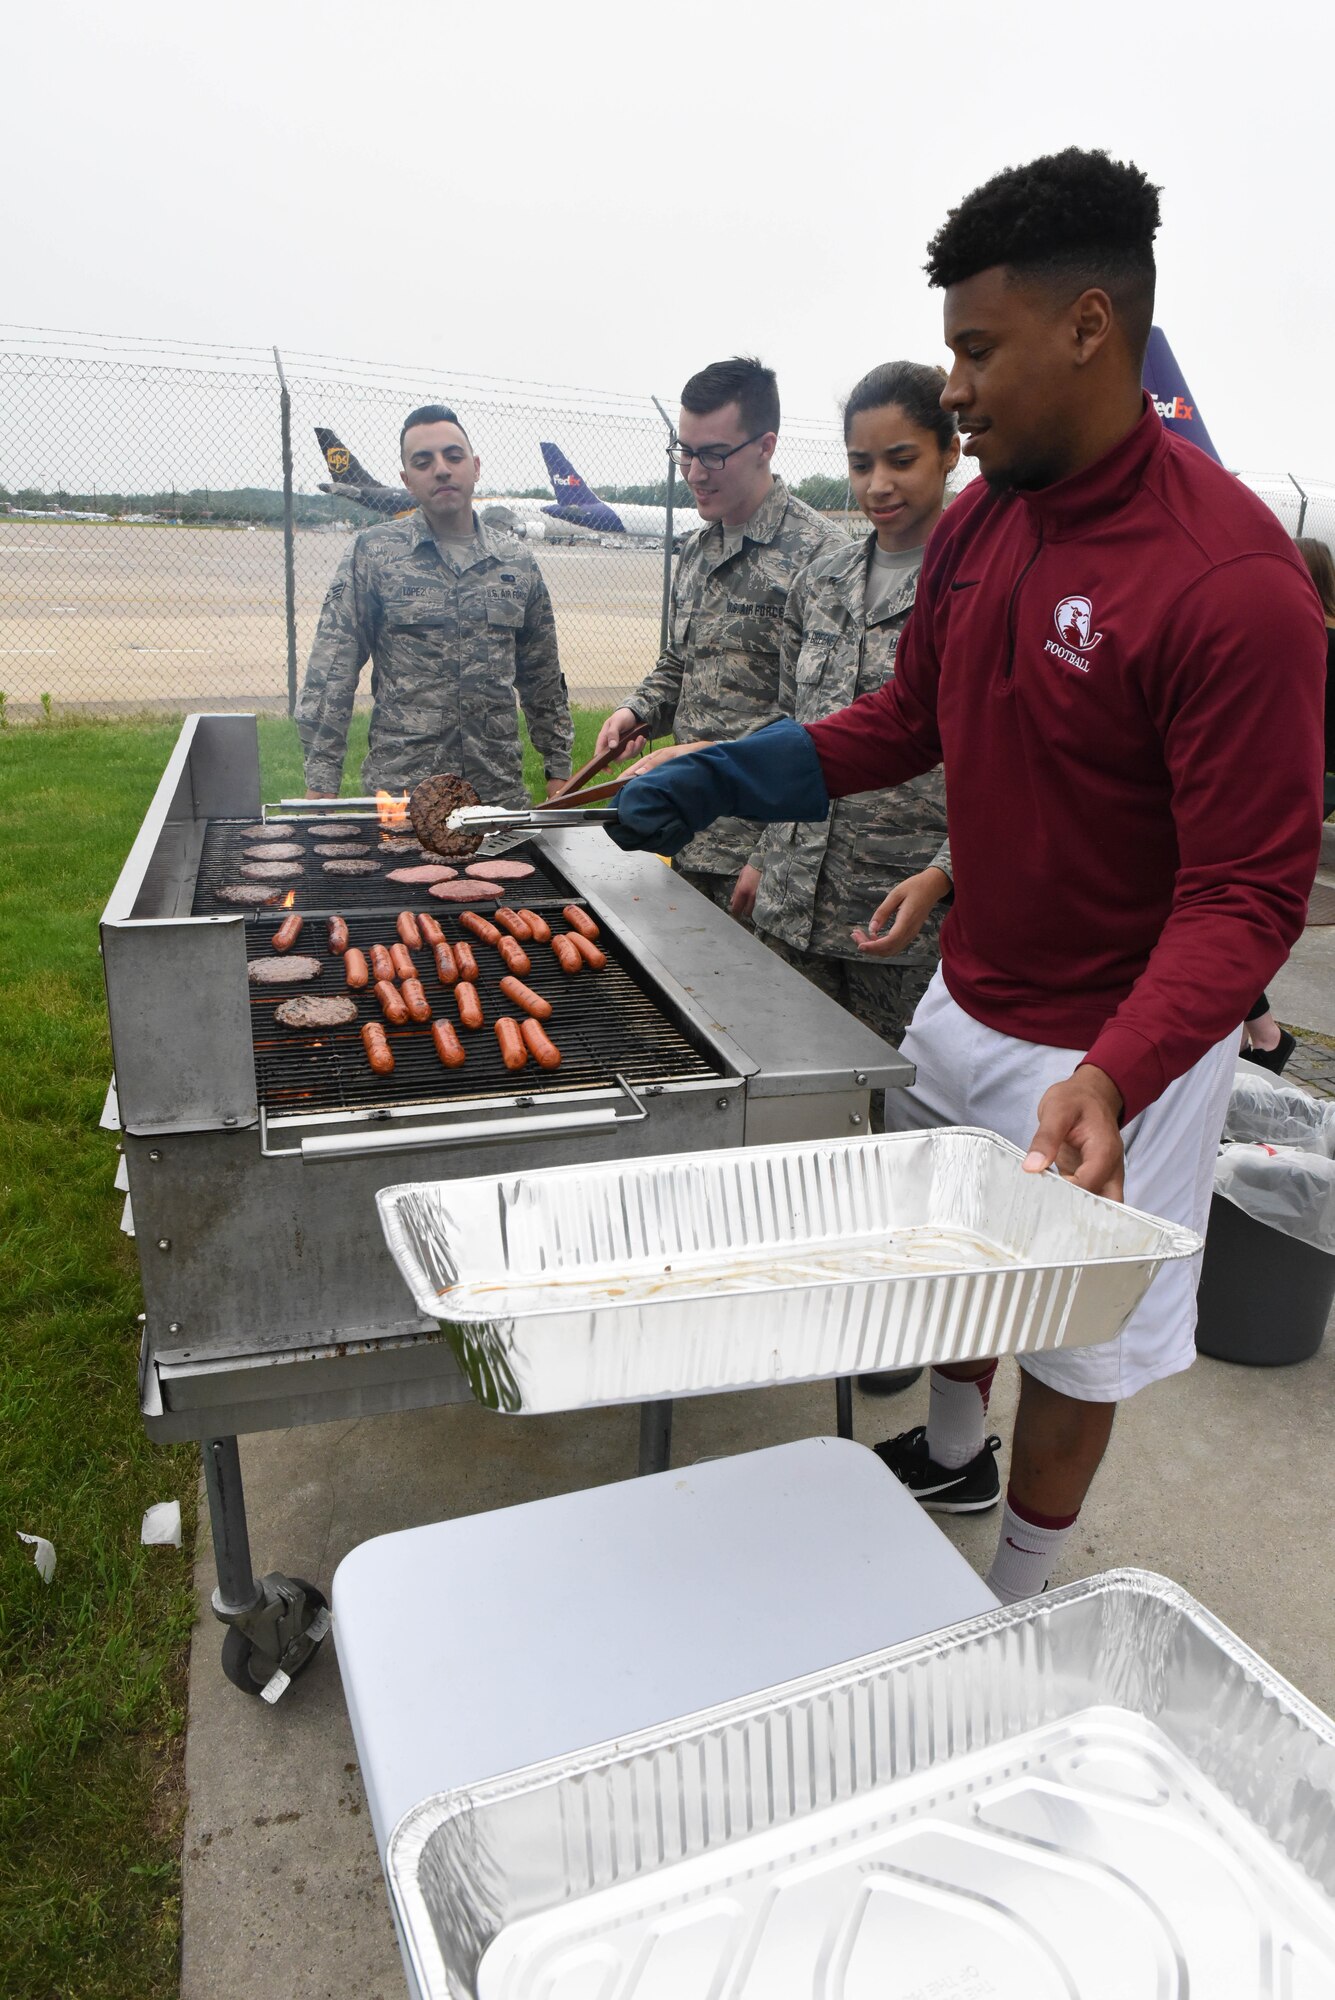 Volunteer Shaun Jones works the grill alongside 193rd Special Operations Wing, Middletown, Pa., services Airmen as part of the Burger Burn event hosted on base, May 20, by the Family Readiness office. Rachel Hoak, Airman and Family Readiness Program Manager, said more than 70 Airmen and family members attended the free event which included burgers, hot dogs, snacks and kids activities. (U.S. Air National Guard photo by Tech. Sgt. Claire Behney/Released)